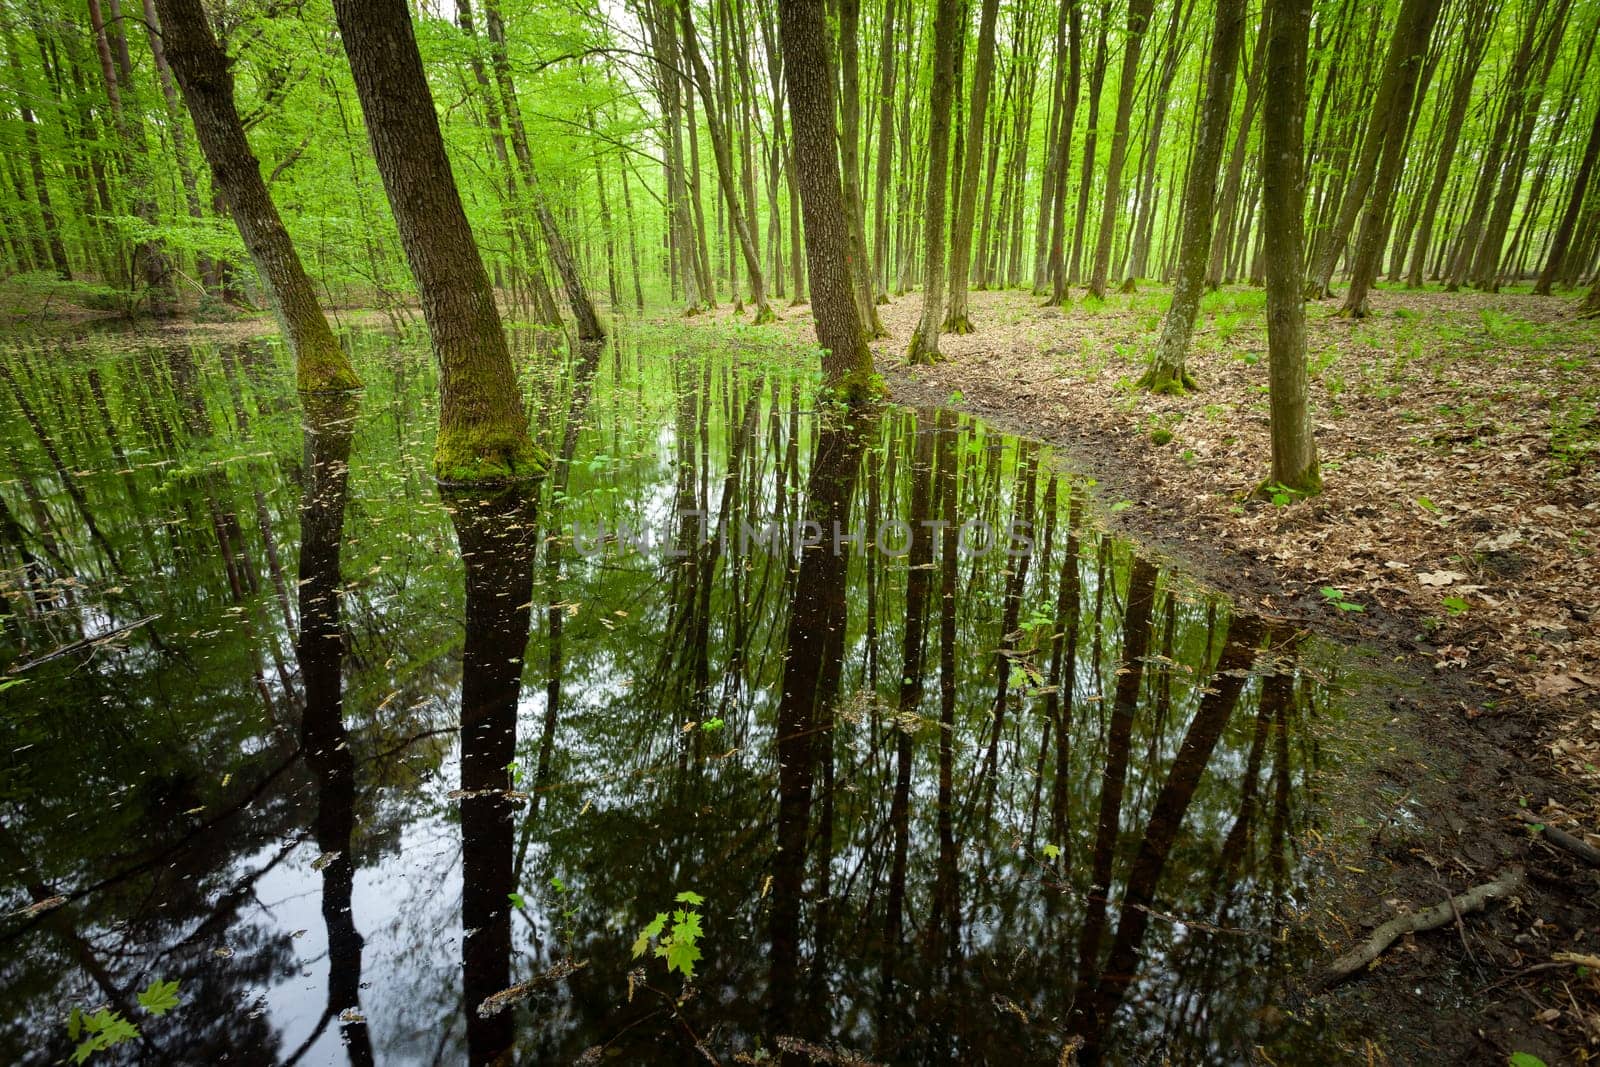 Pond in the spring green forest and the reflection of trees in the water by darekb22